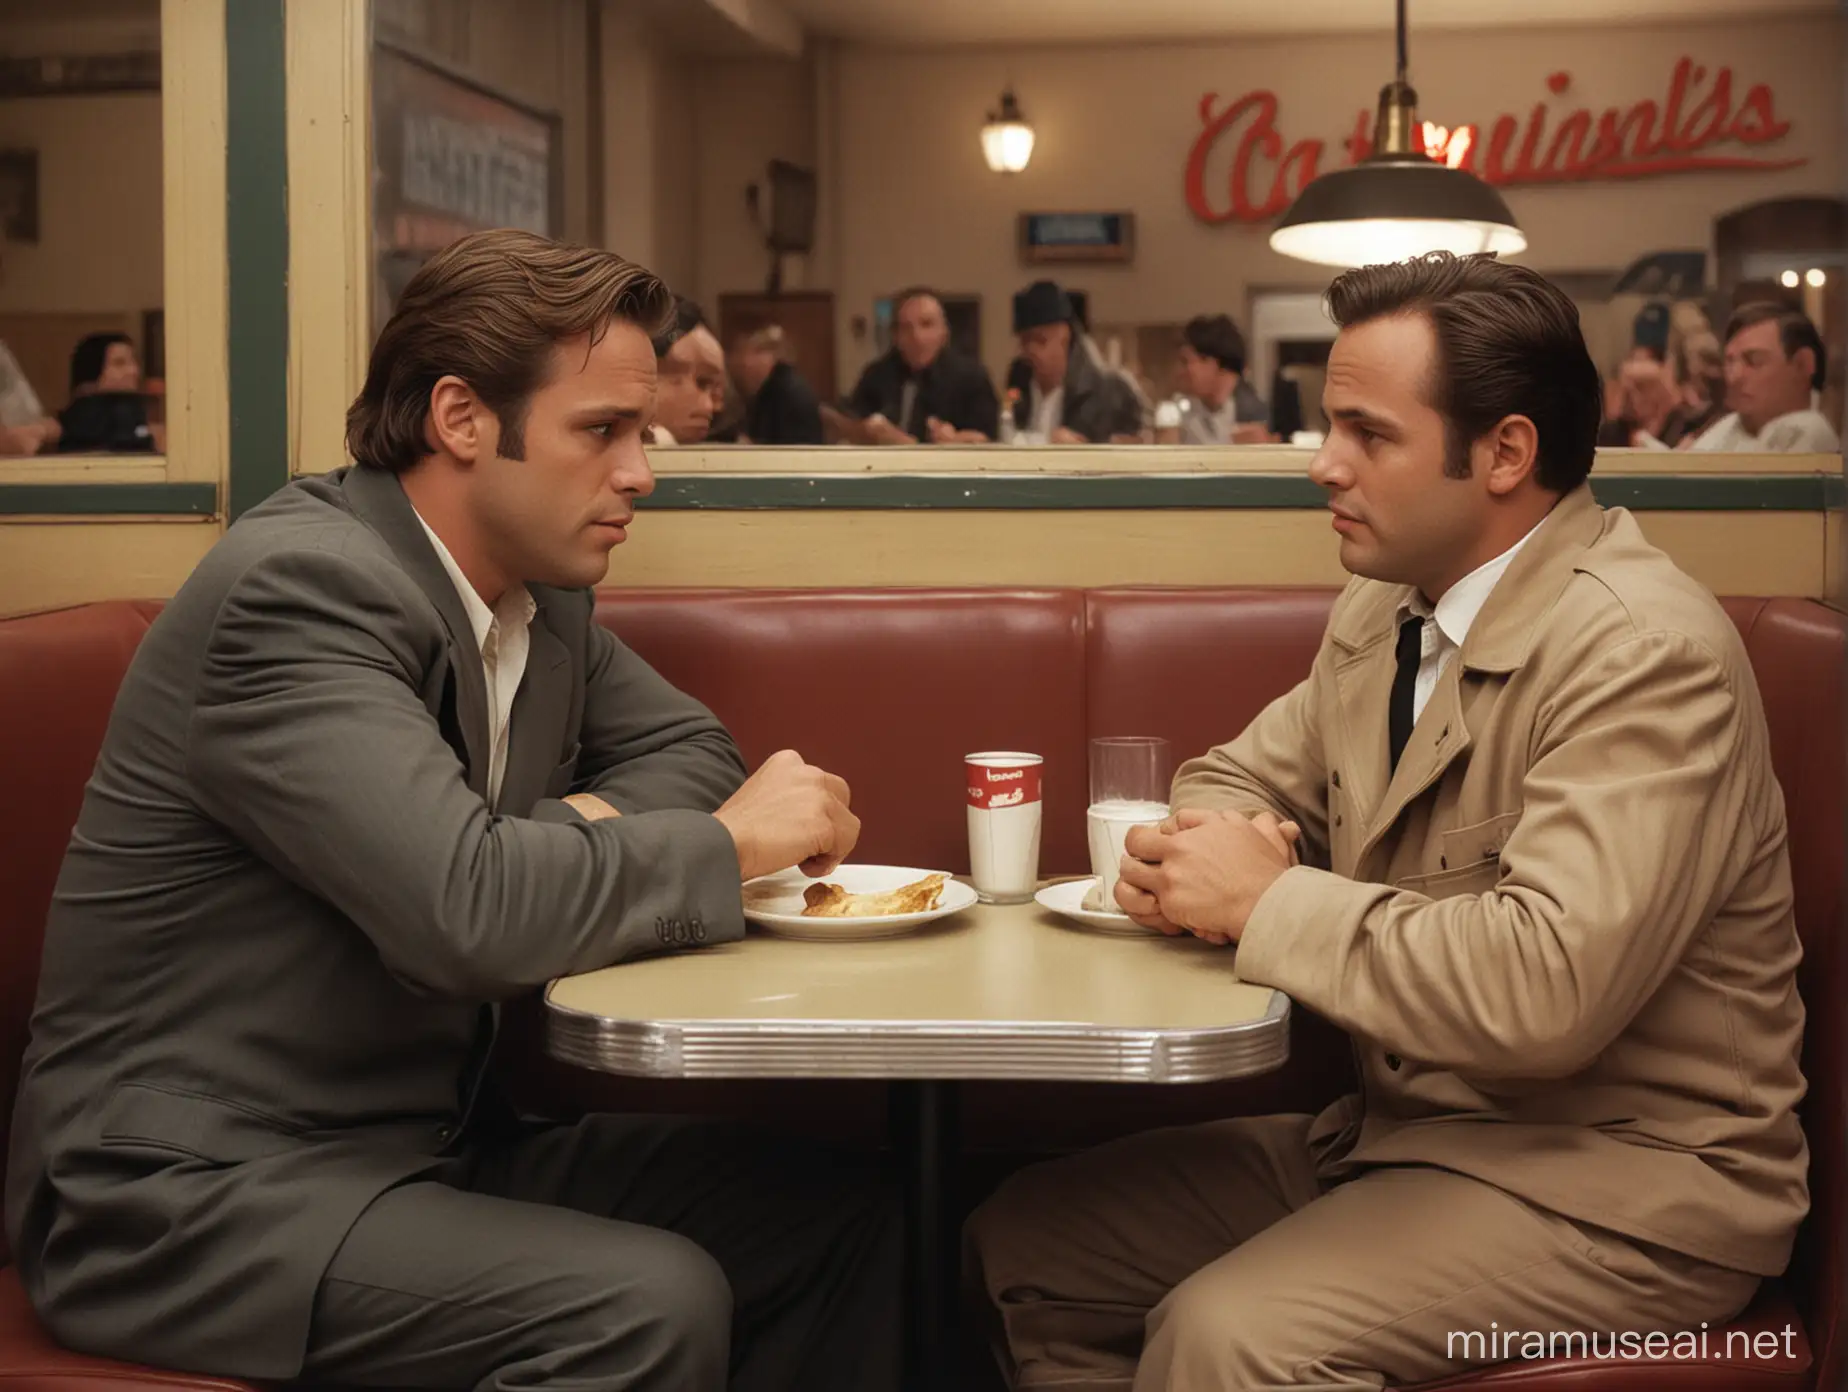 A scene from a movie. We see Jason Sudeikus. He is seated directly across from actor Marlon Brando. They are seated across from one another at a diner booth. It is a color photograph 